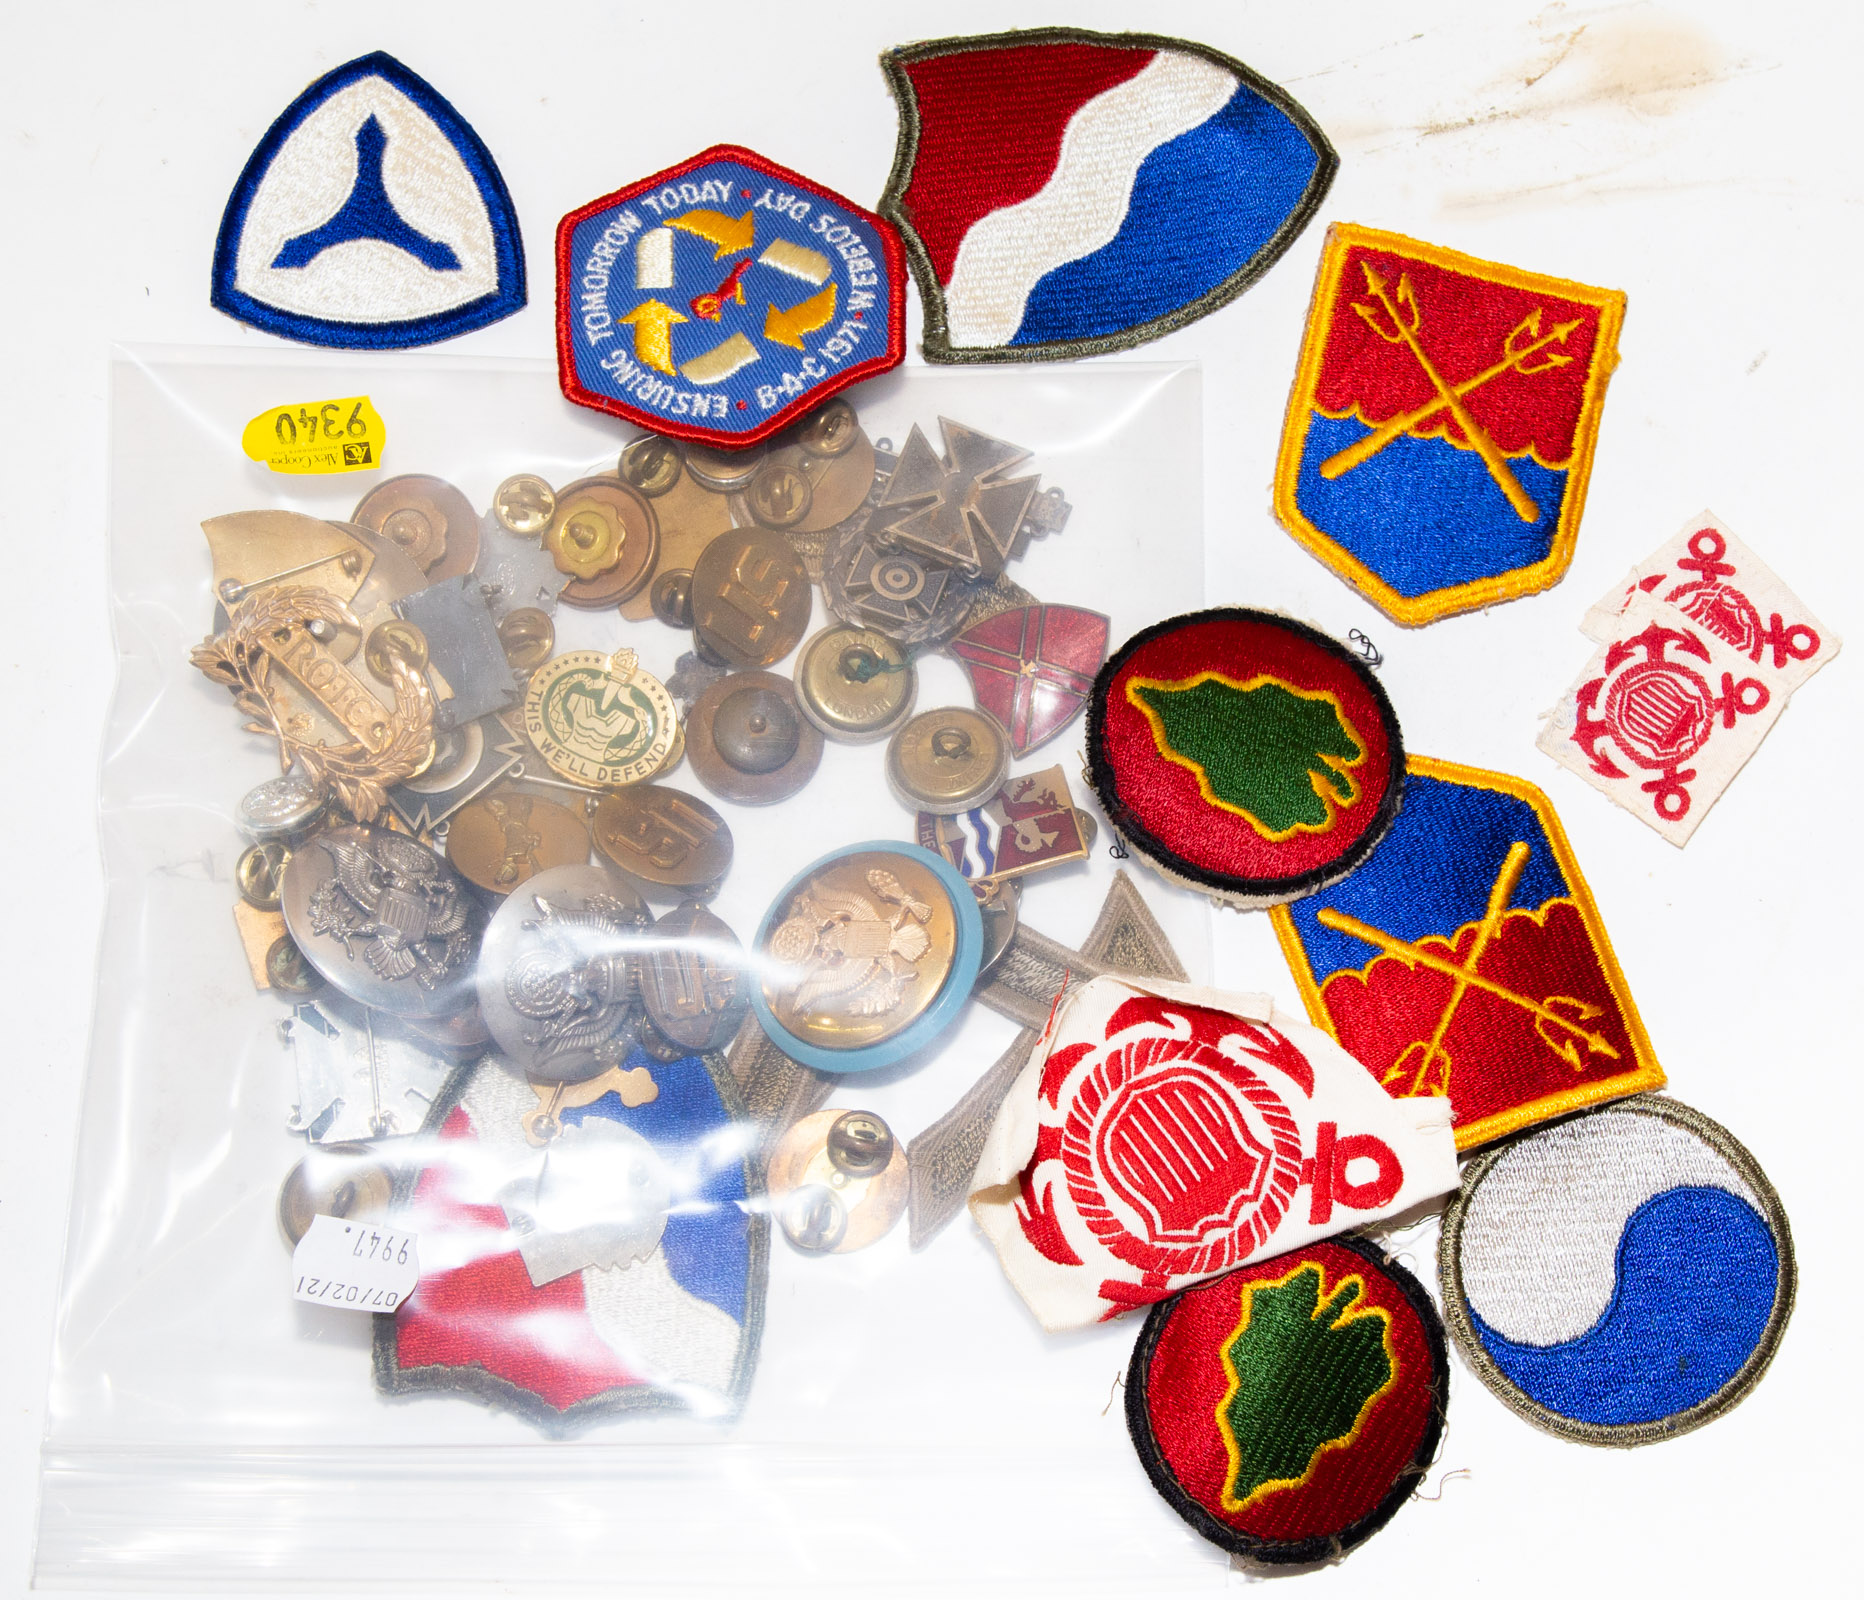 GROUP OF MILITARY BADGES PATCHES 334532